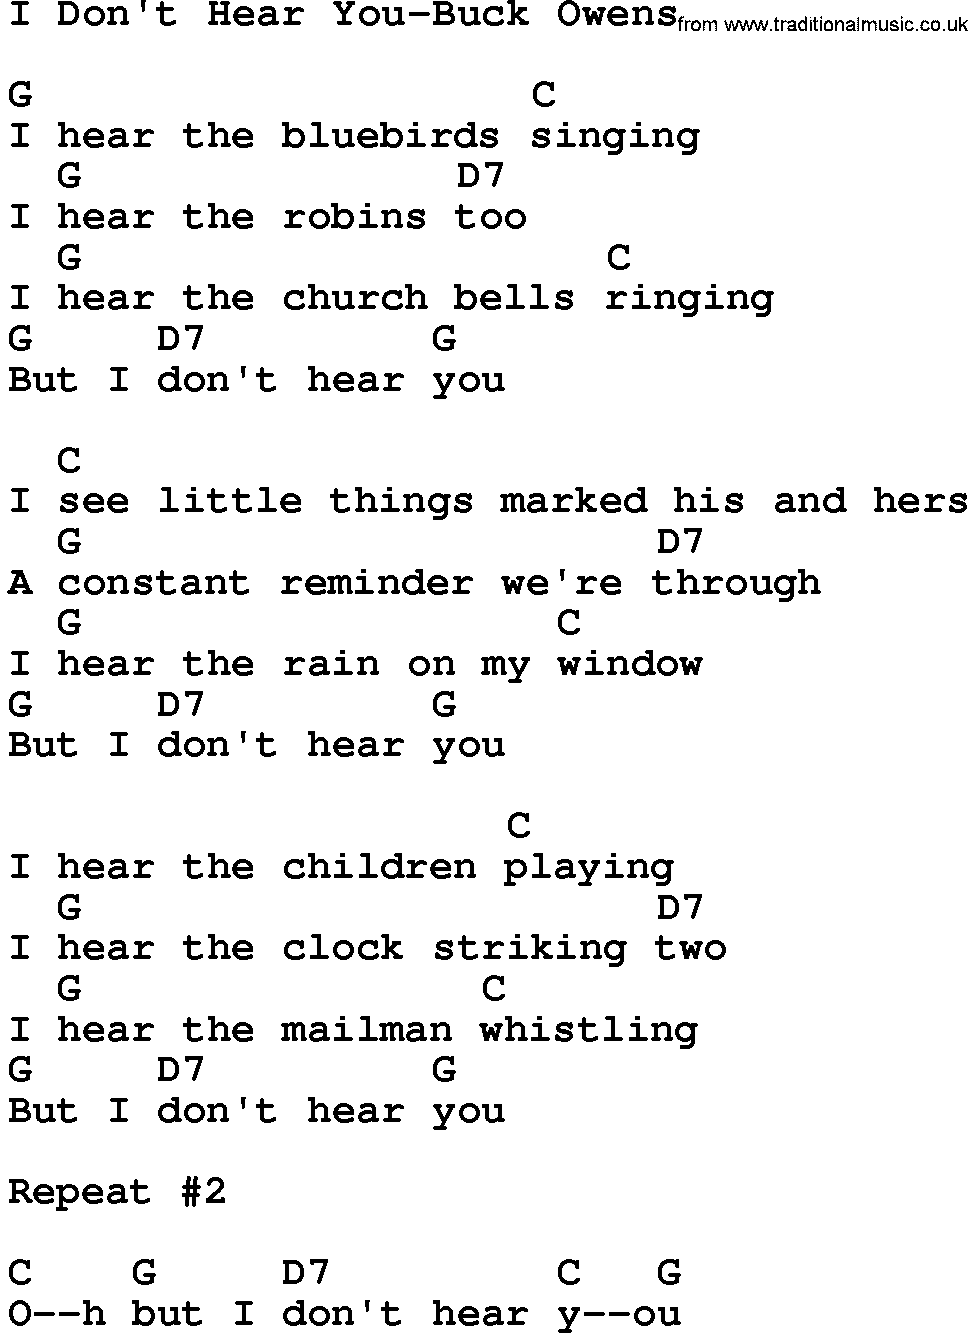 Country music song: I Don't Hear You-Buck Owens lyrics and chords